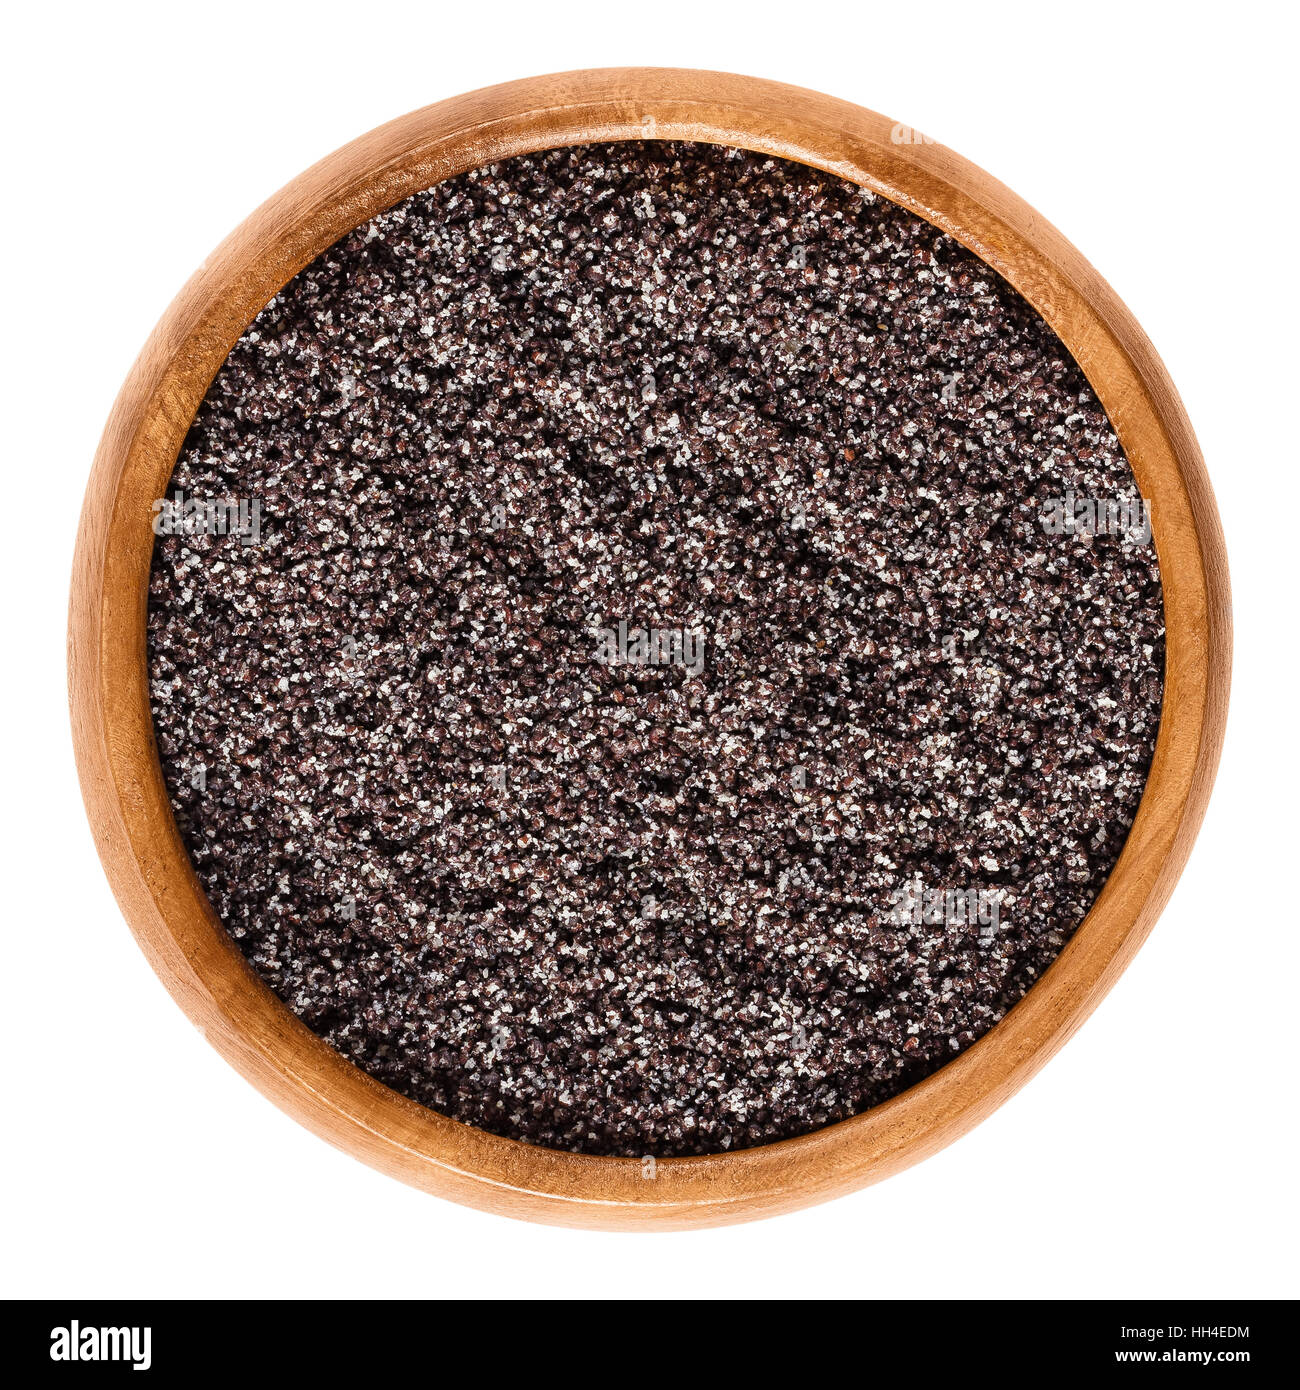 Ground gray poppy seeds in wooden bowl. Oilseed from opium poppy Paper somniferum, used as an ingredient in many foods. Stock Photo